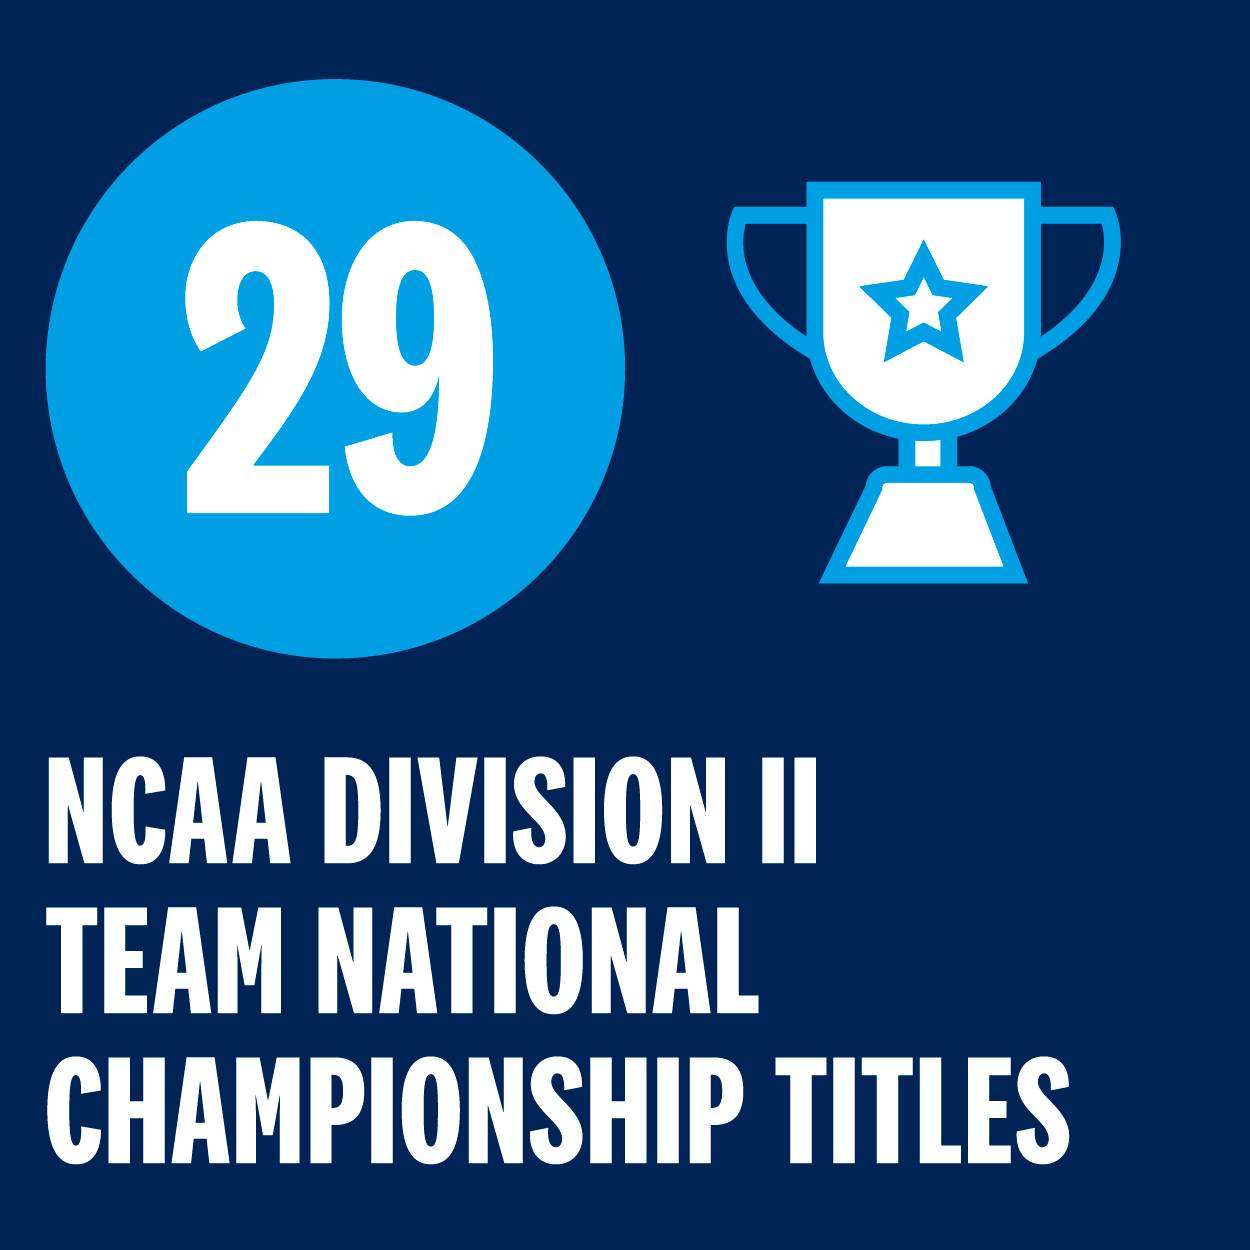 29 NCAA Division II Team National Championship Titles